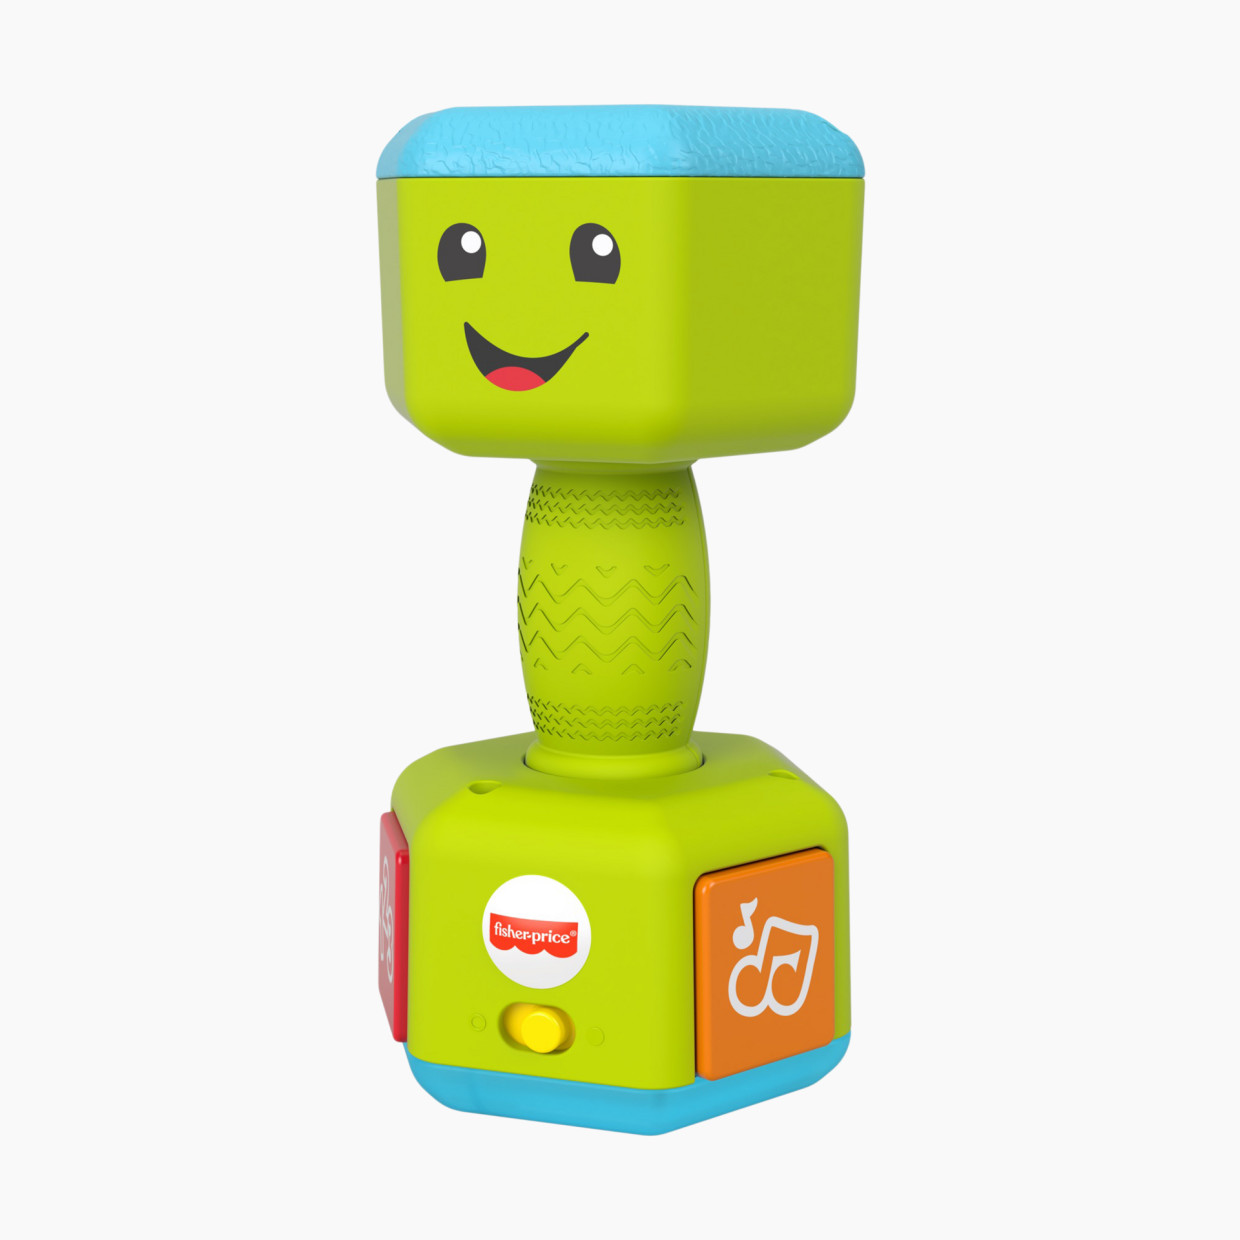 Fisher-Price Laugh & Learn Countin' Reps Dumbbell Toy.